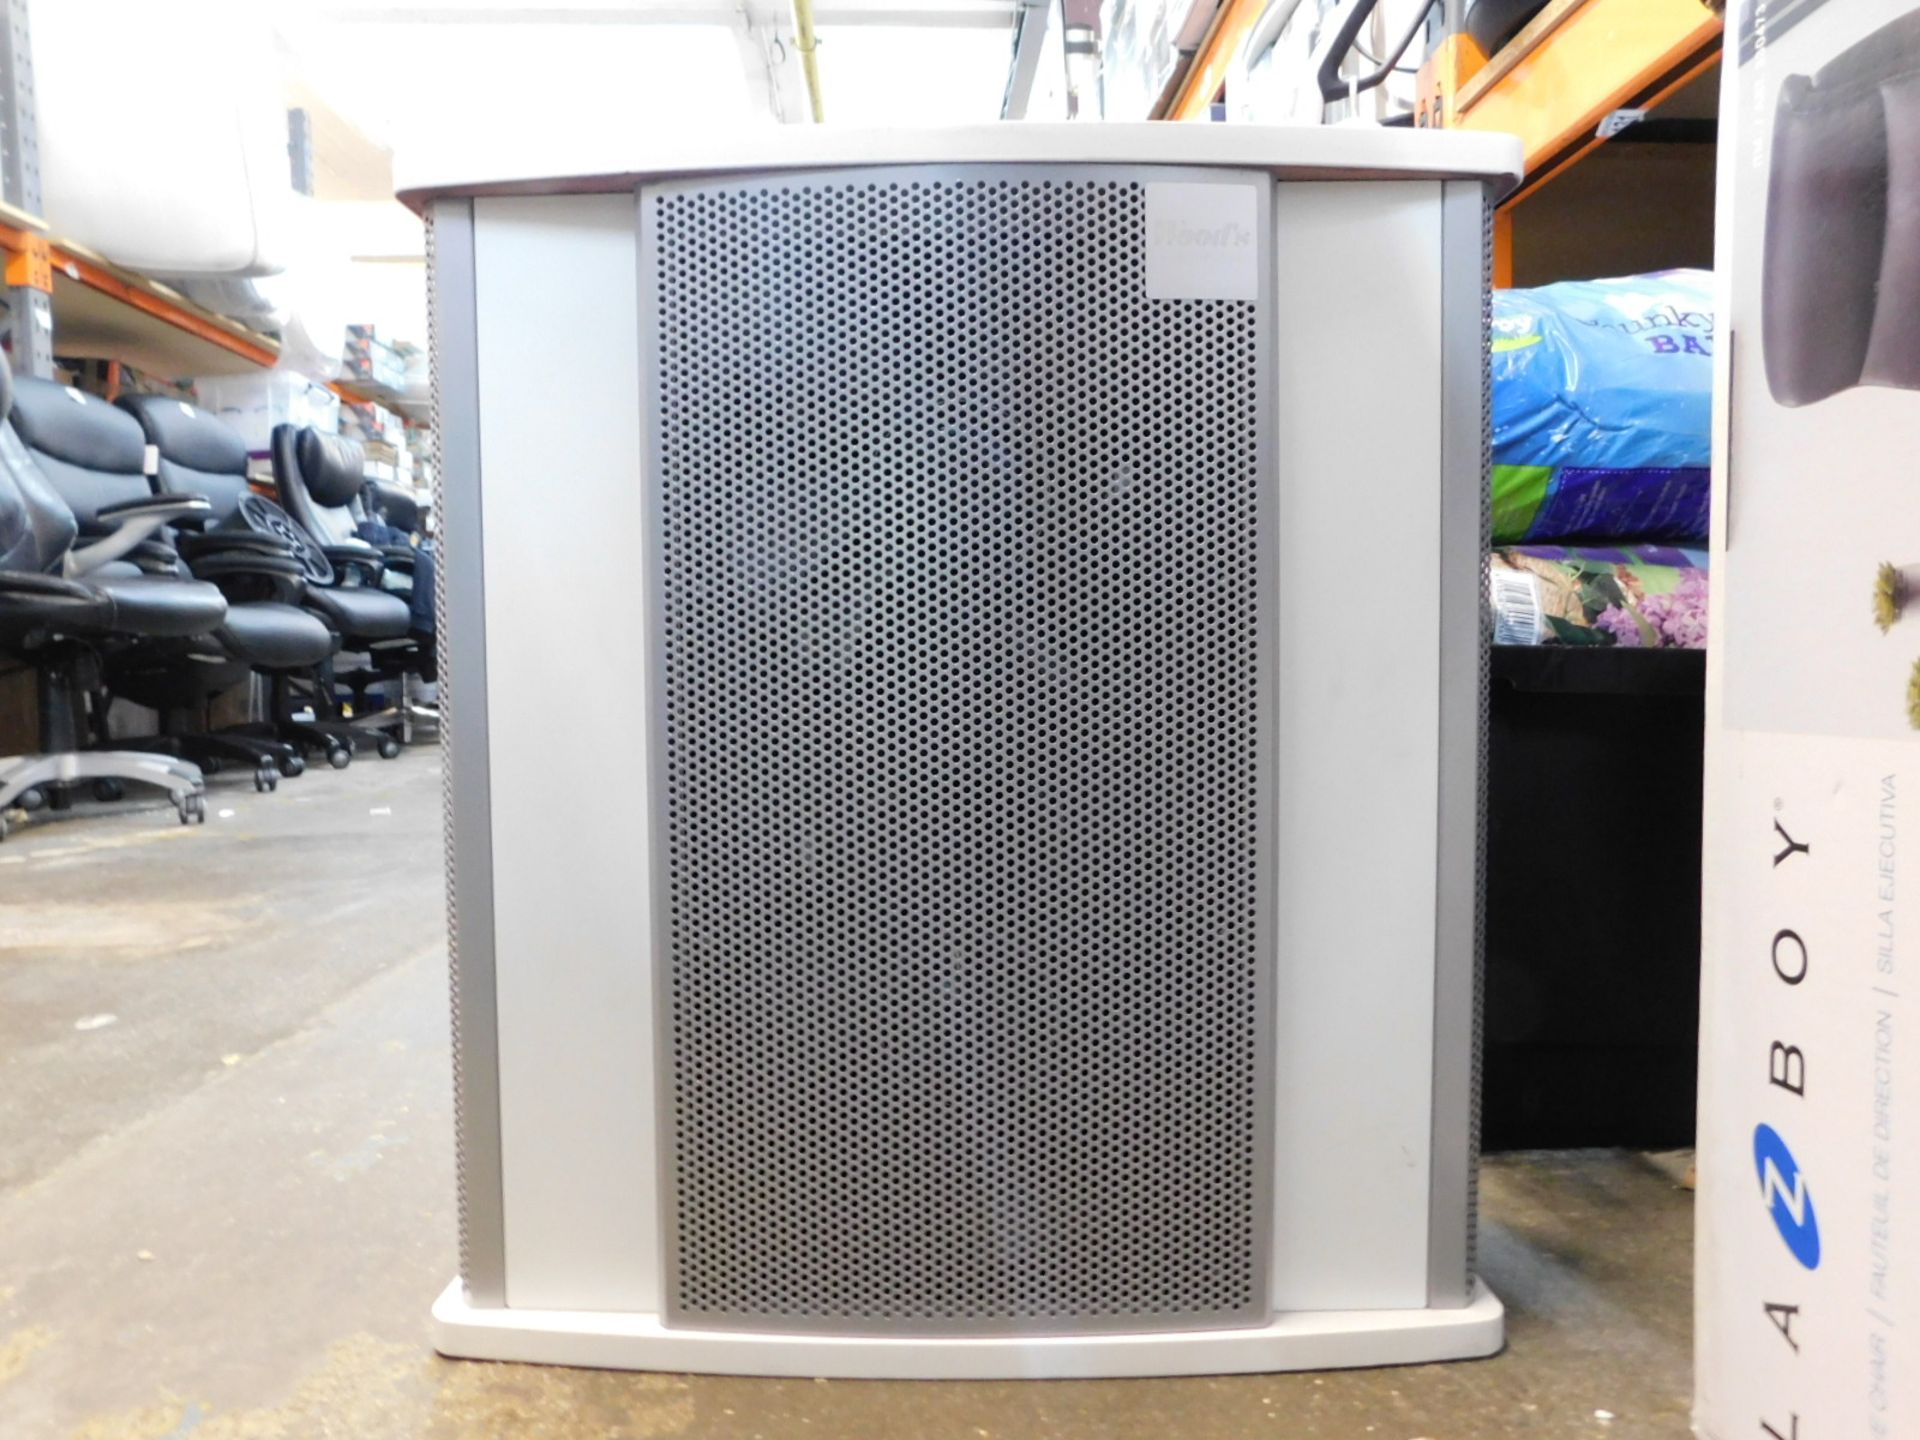 1 WOOD'S GRAN 900 AIR PURIFIER WITH 4 SPEED FILTRATION, AIR CLEANER RRP Â£299